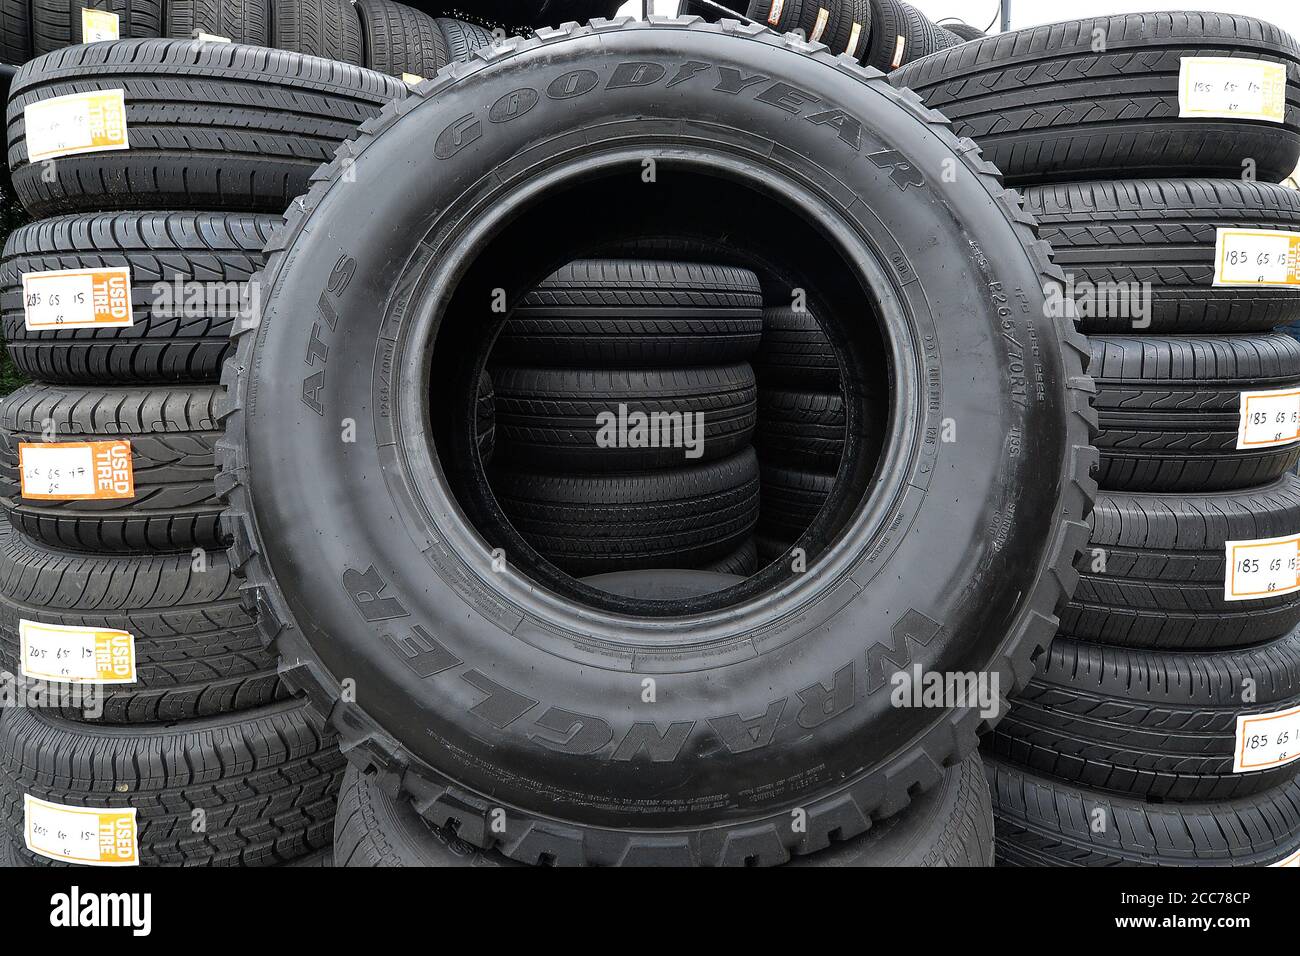 New York City, USA. 19th Aug, 2020. A Goodyear tire is on display outside a used tire shop in the New York City borough of Queens, in New York, NY, August 19, 2020. President Donald Trump called for a boycott of Goodyear tires after it was reported that the company has banned the wearing of any politically affiliated slogans, including “MAGA” hats. (Anthony Behar/Sipa USA) Credit: Sipa USA/Alamy Live News Stock Photo